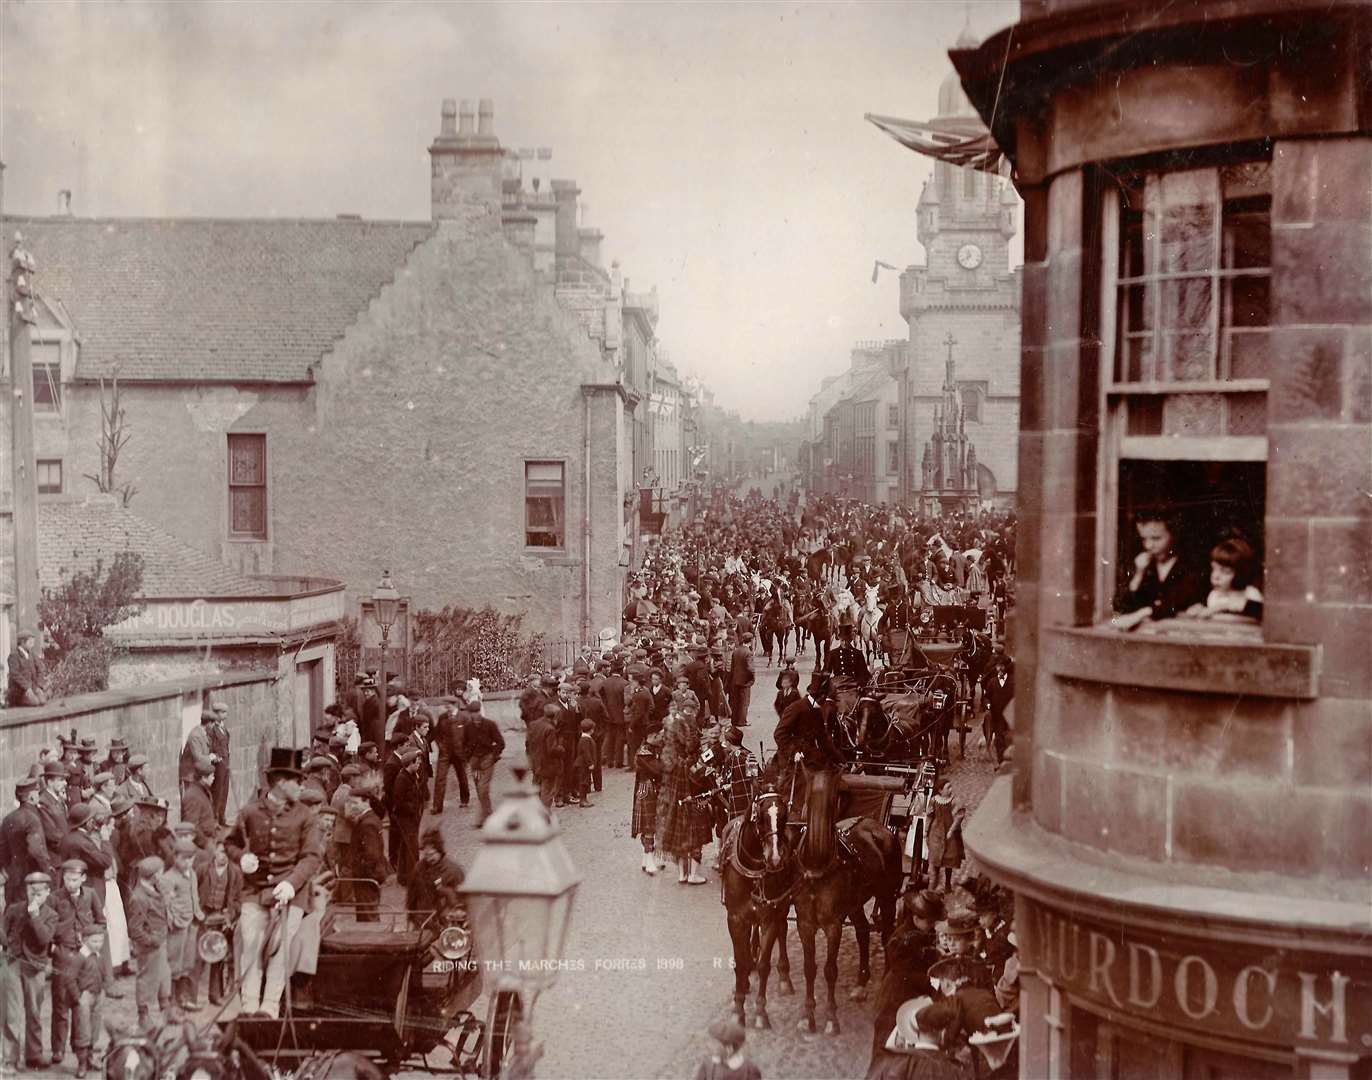 Riding the Marches, High Street, by R Stewart, Elgin, taken in May, 1898, donated by Joan and Douglas Grant of Moravian Press.